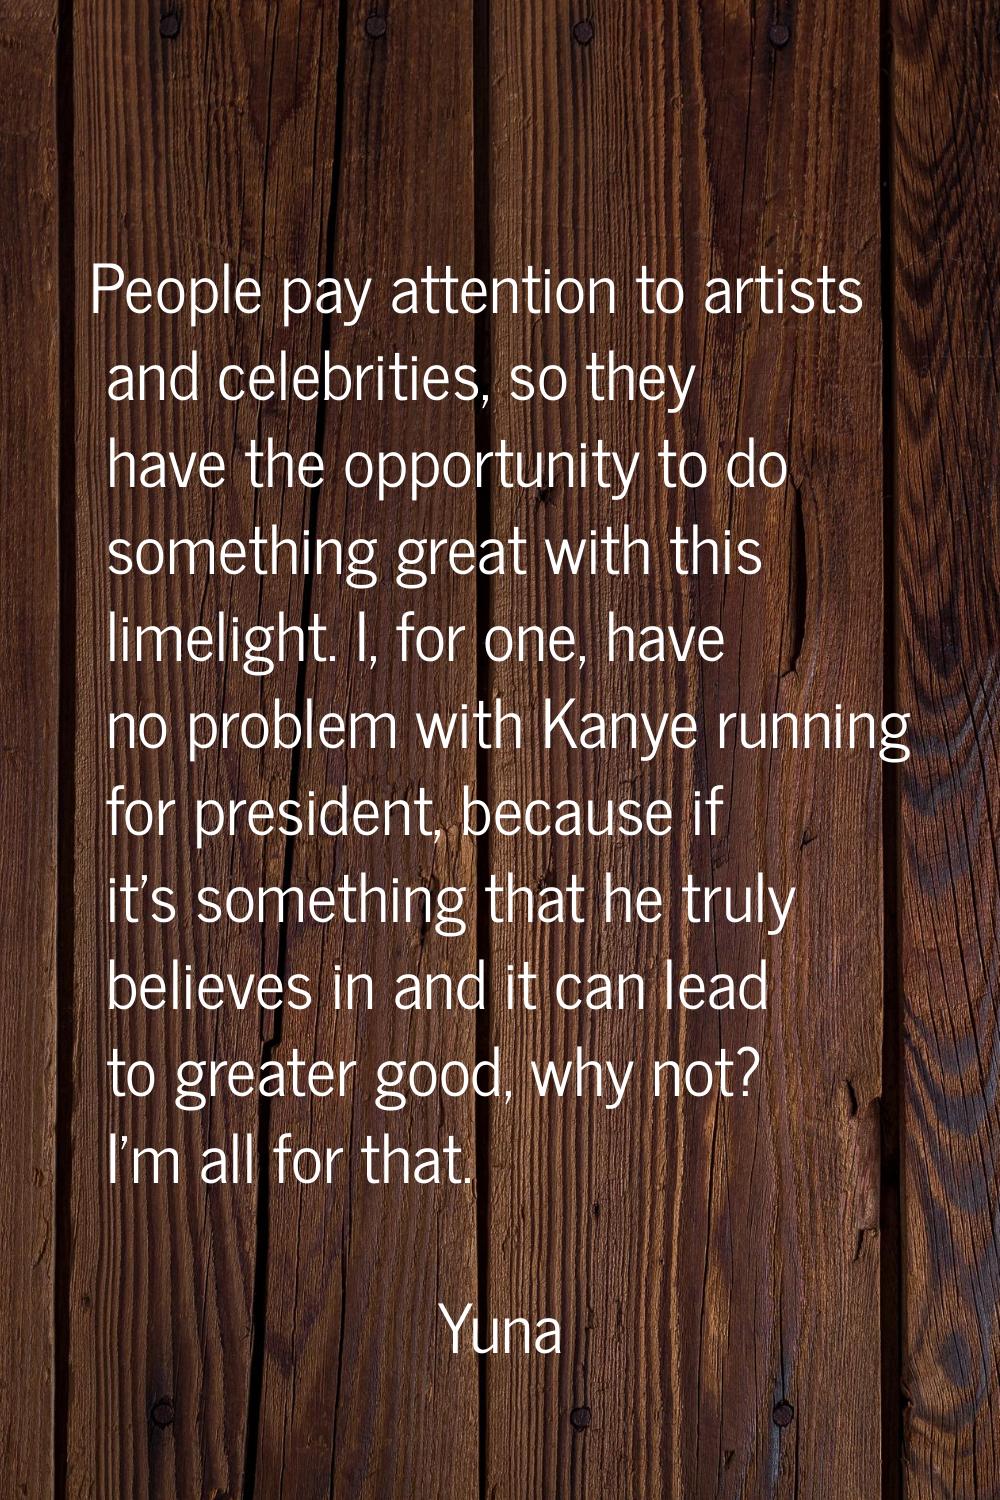 People pay attention to artists and celebrities, so they have the opportunity to do something great